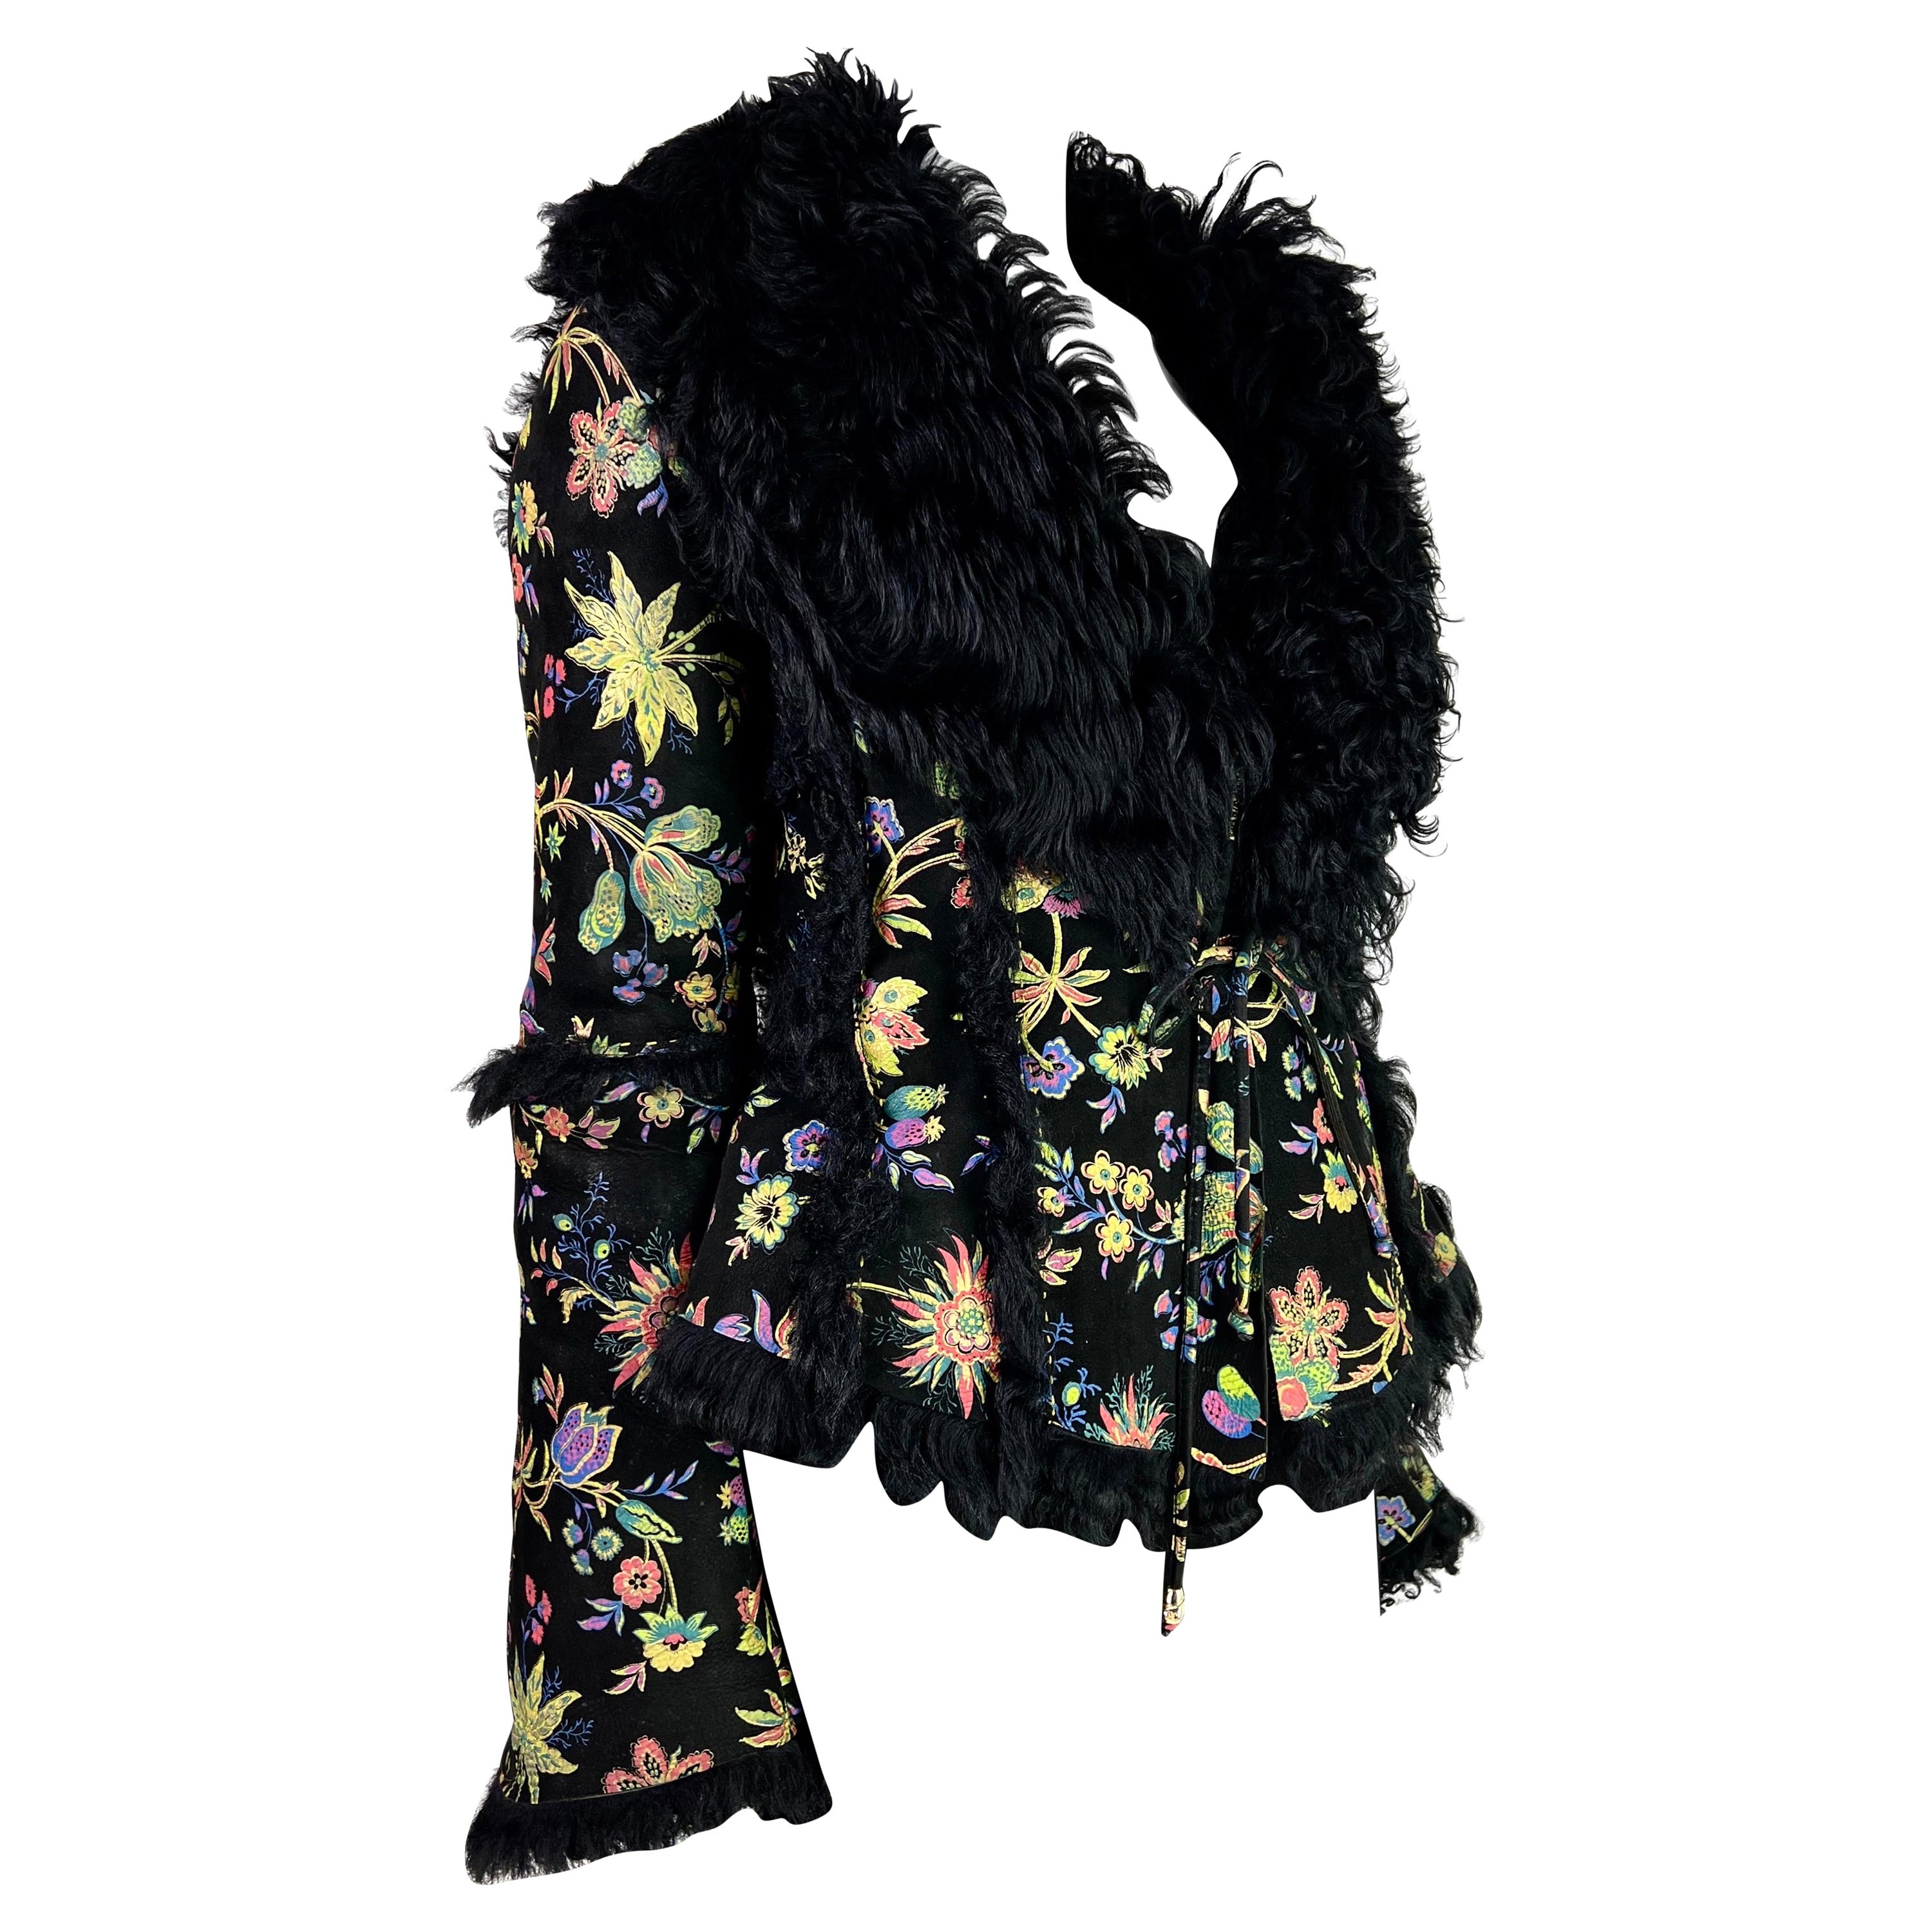 Roberto Cavalli Fall 1999 Hand-painted Flower Shearling Jacket For Sale